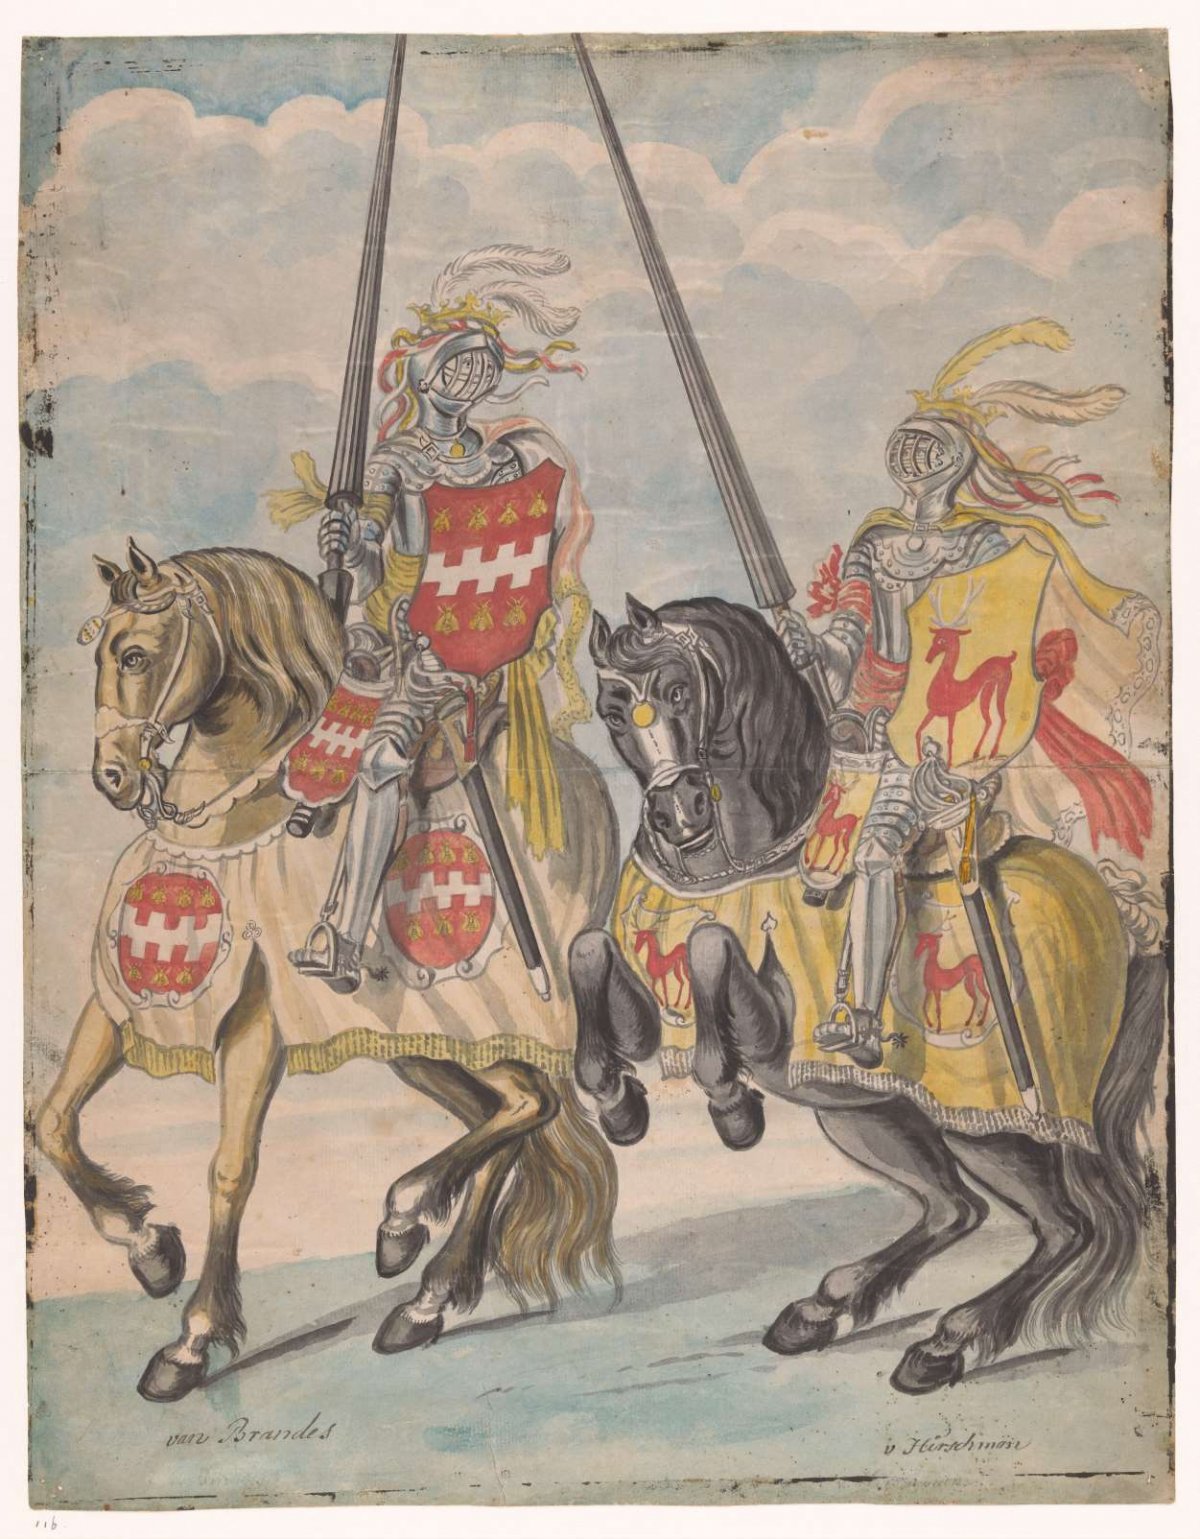 Knights with the family arms of Brandes and Hirschman, Jan Brandes, 1770 - 1808